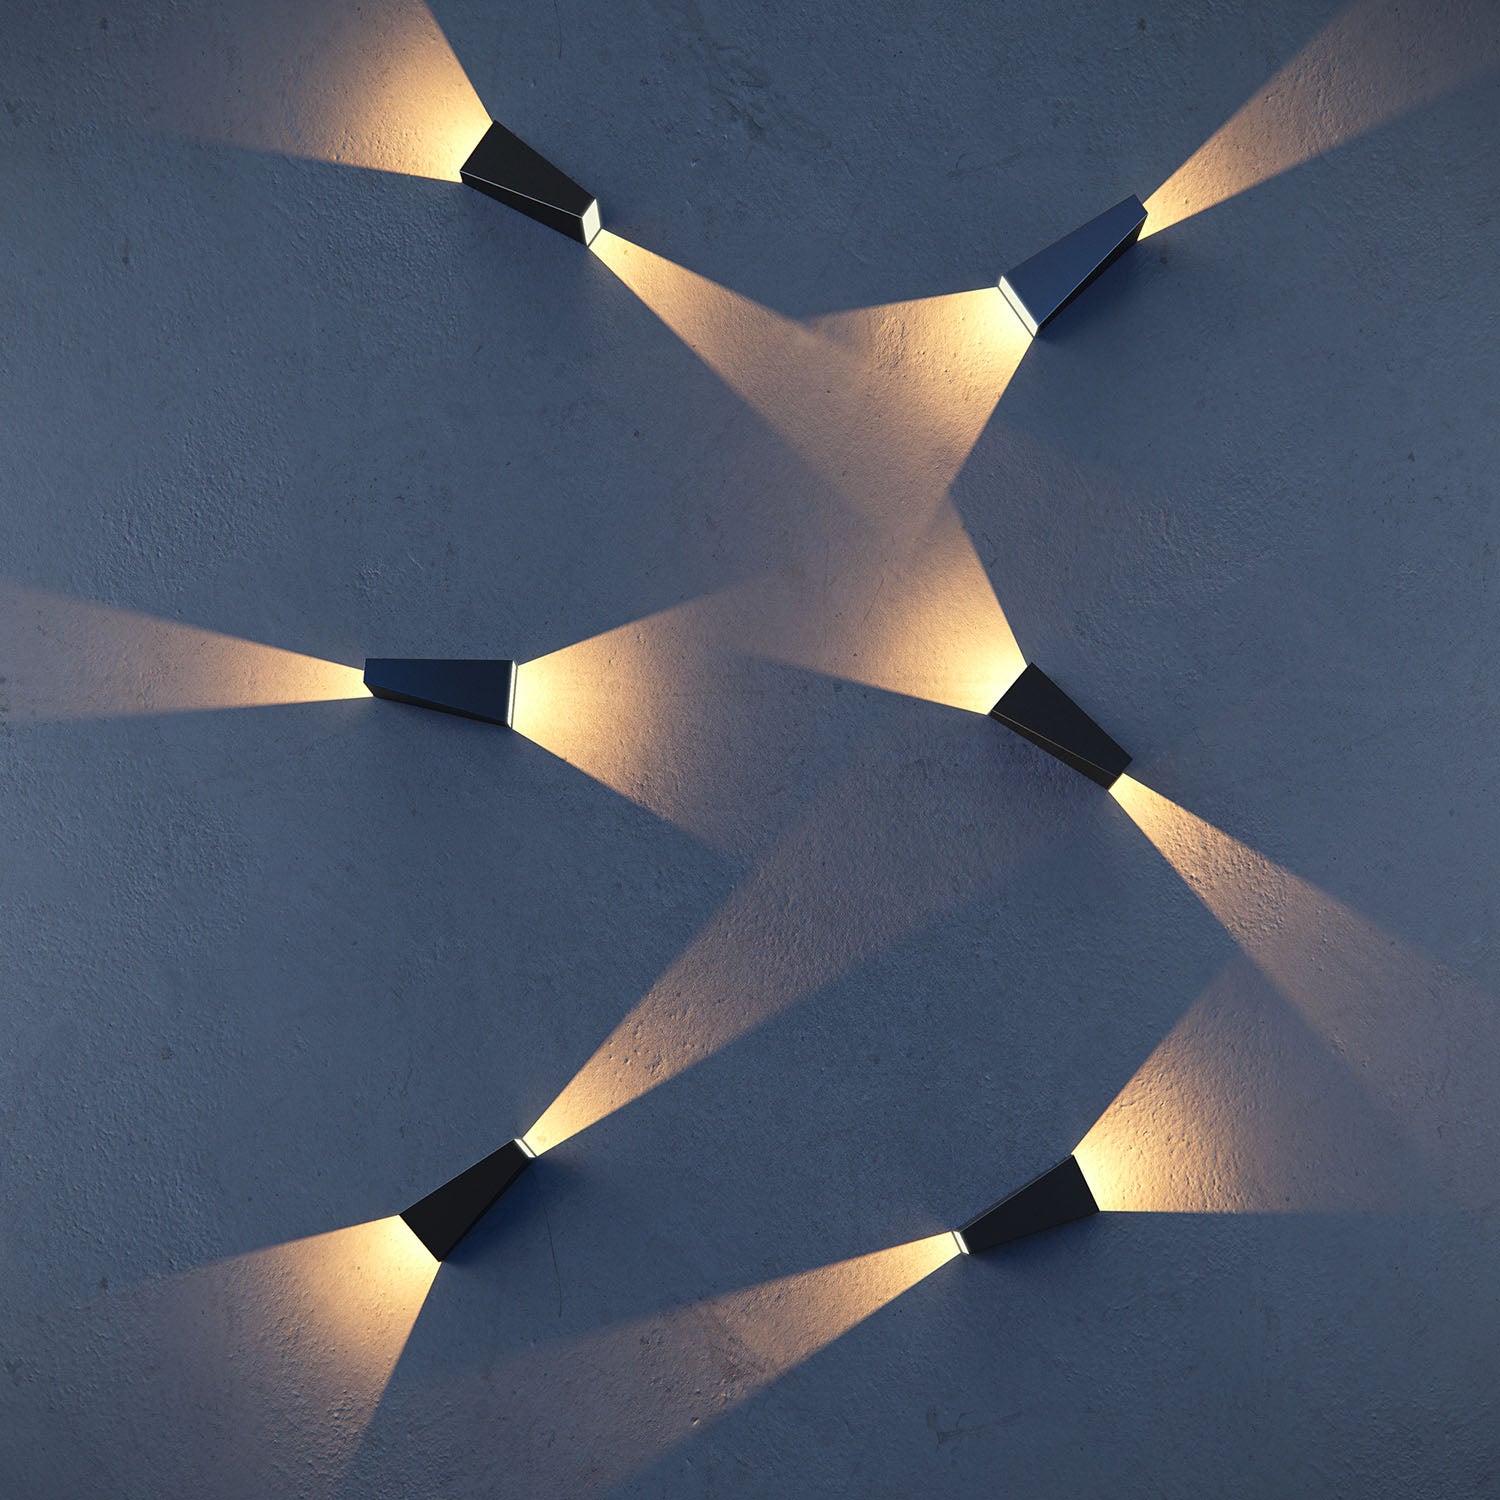 TIMES SQUARE - Geometric design exterior wall light, waterproof and resistant